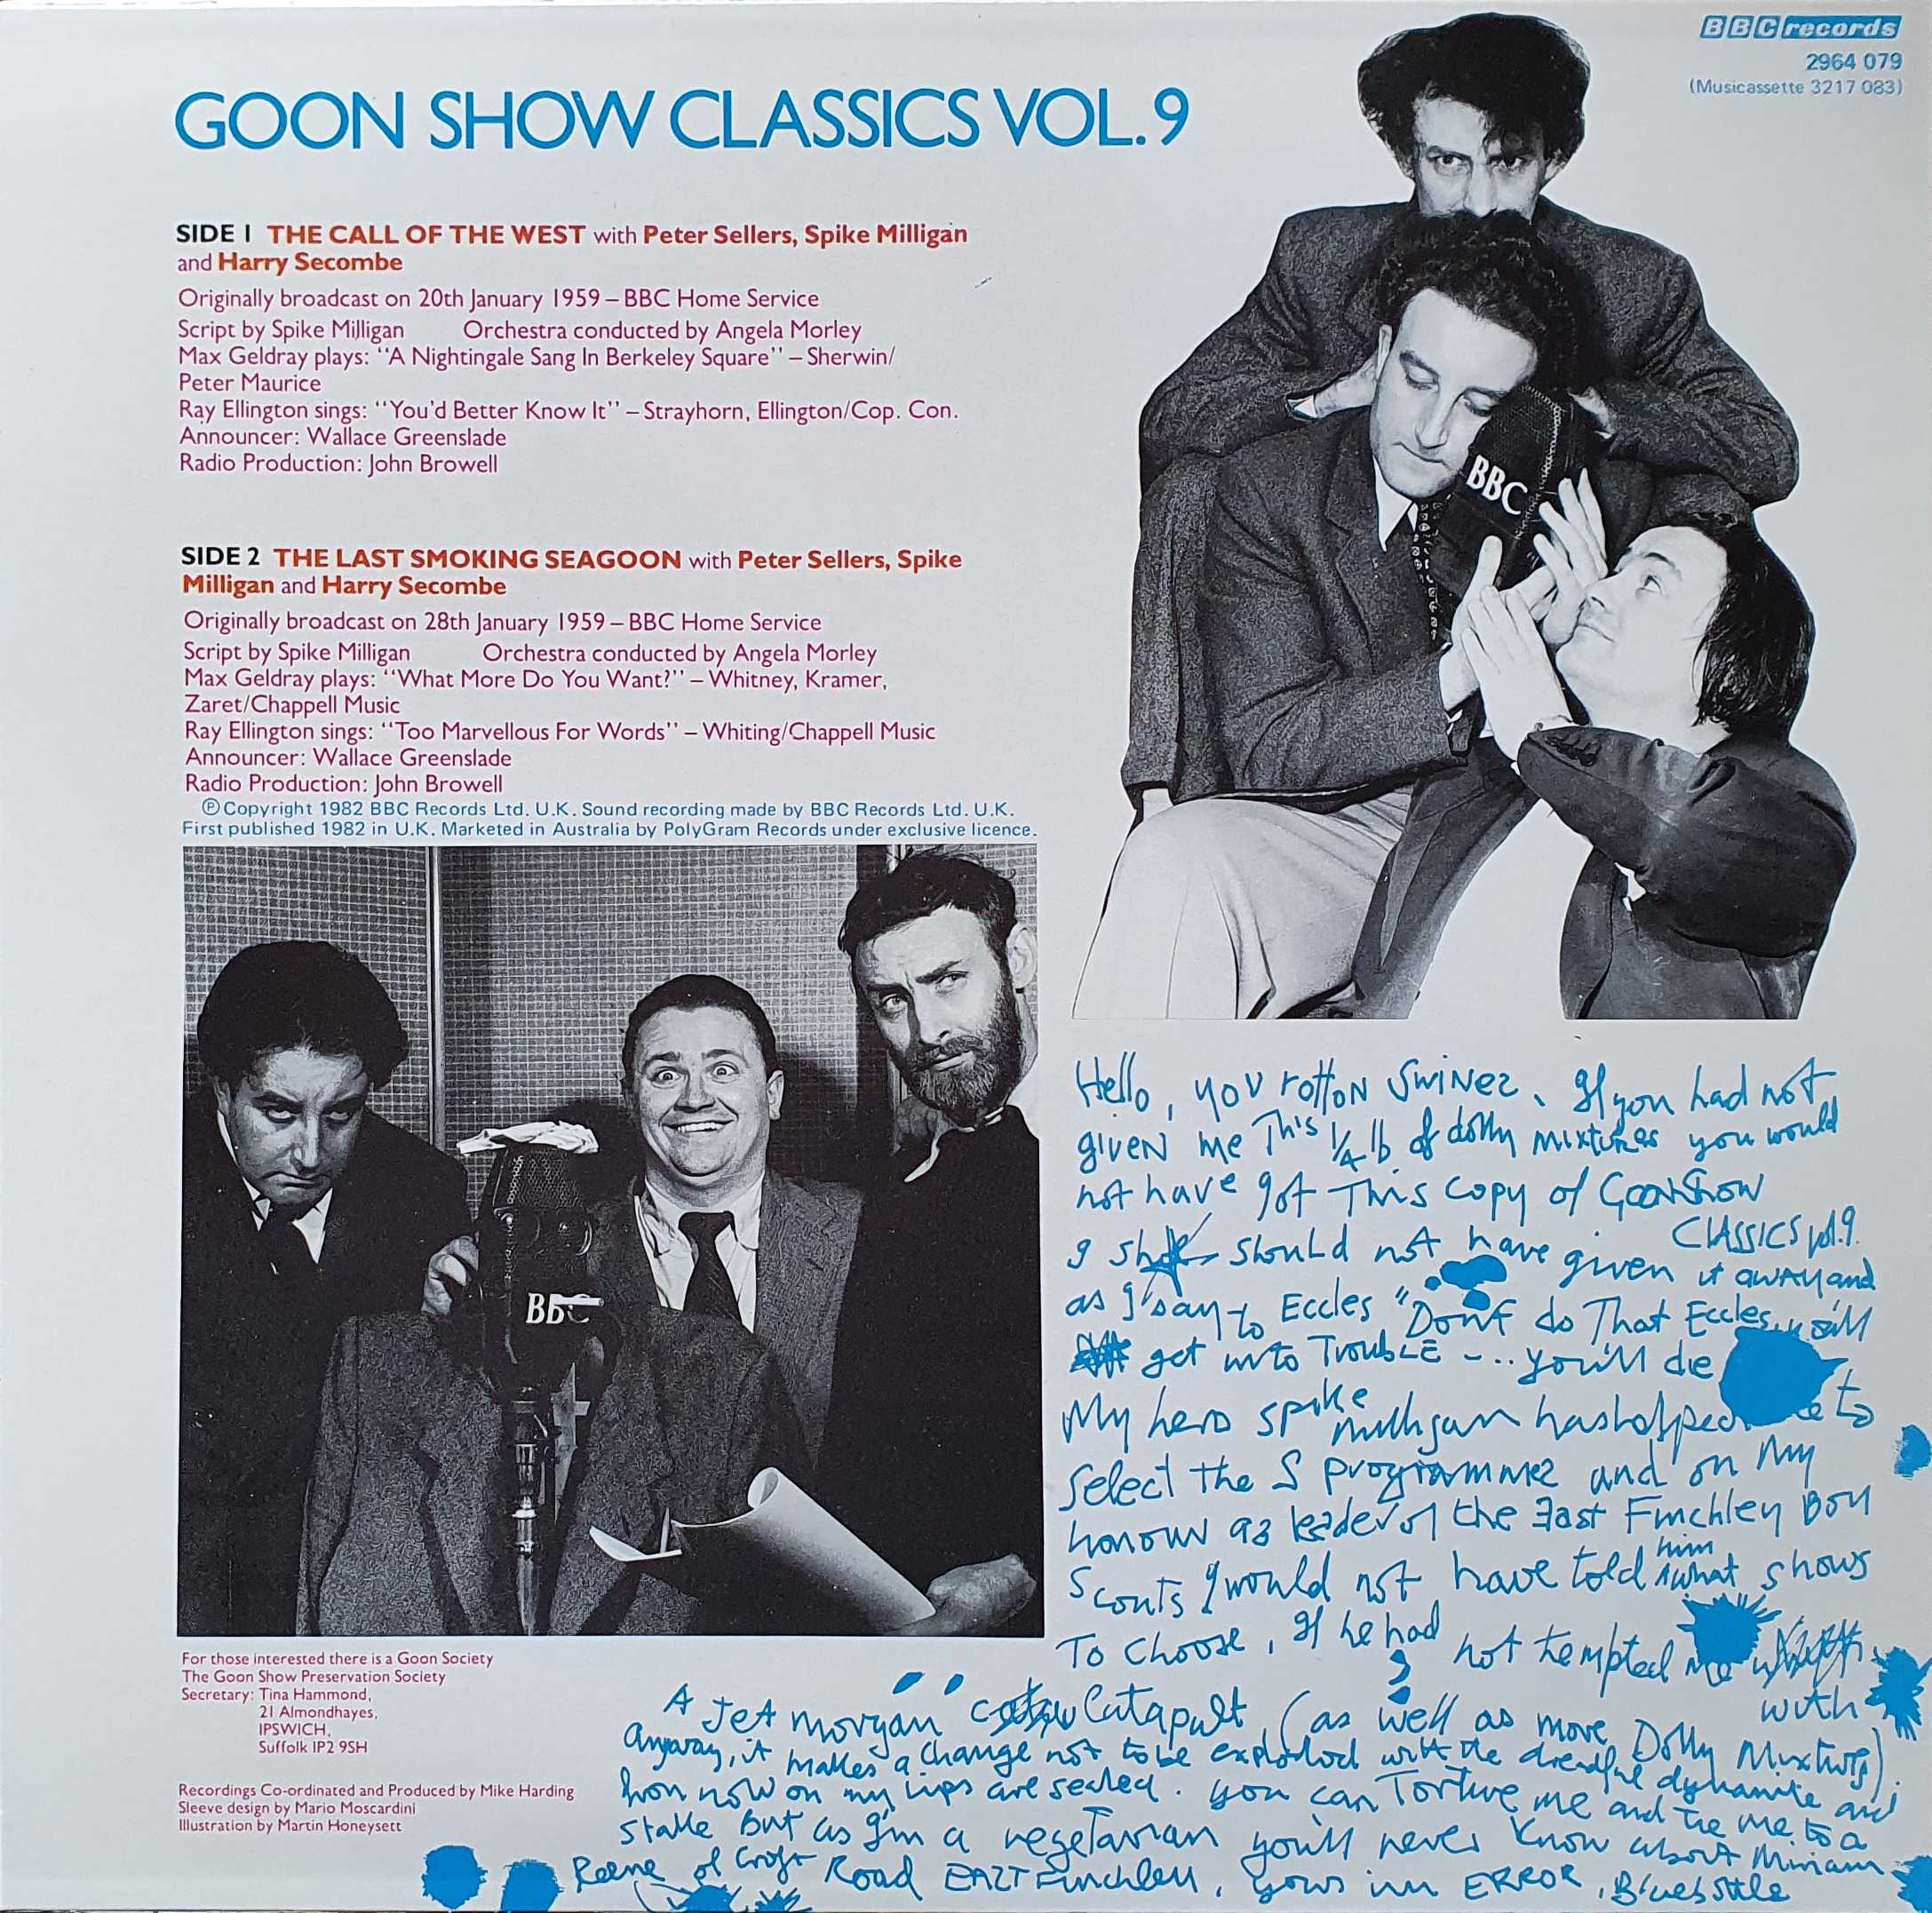 Picture of 2964 079 Goon Show classics vol. 9 by artist The Goon Show from the BBC records and Tapes library